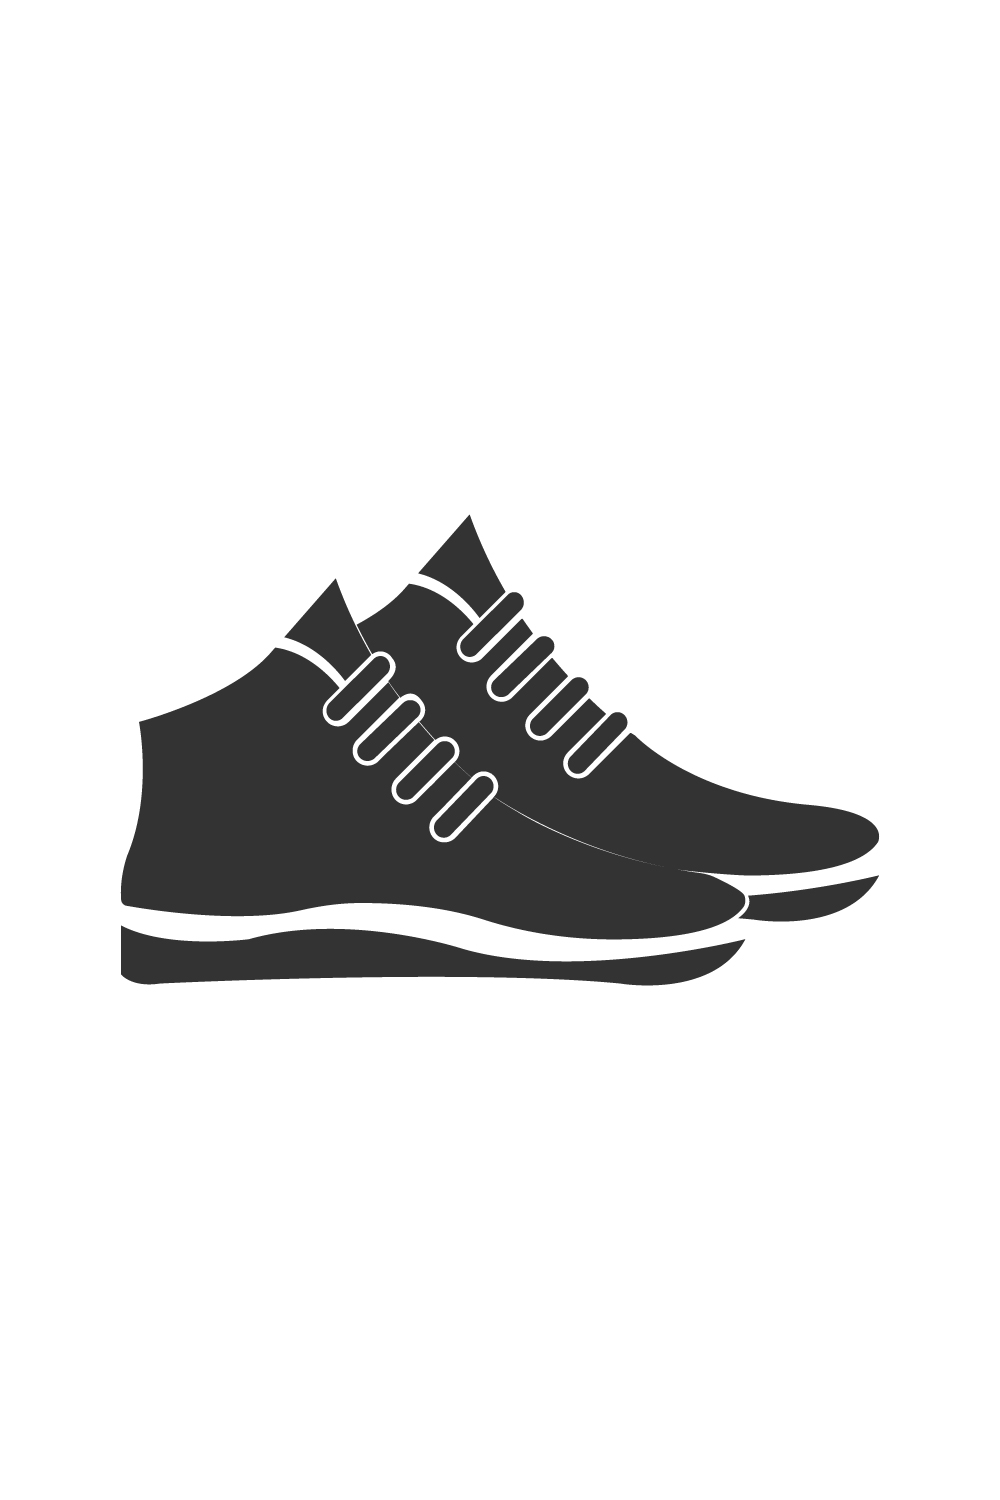 Modern Shoes icon design template vector images Man Shoes logo best quality pinterest preview image.